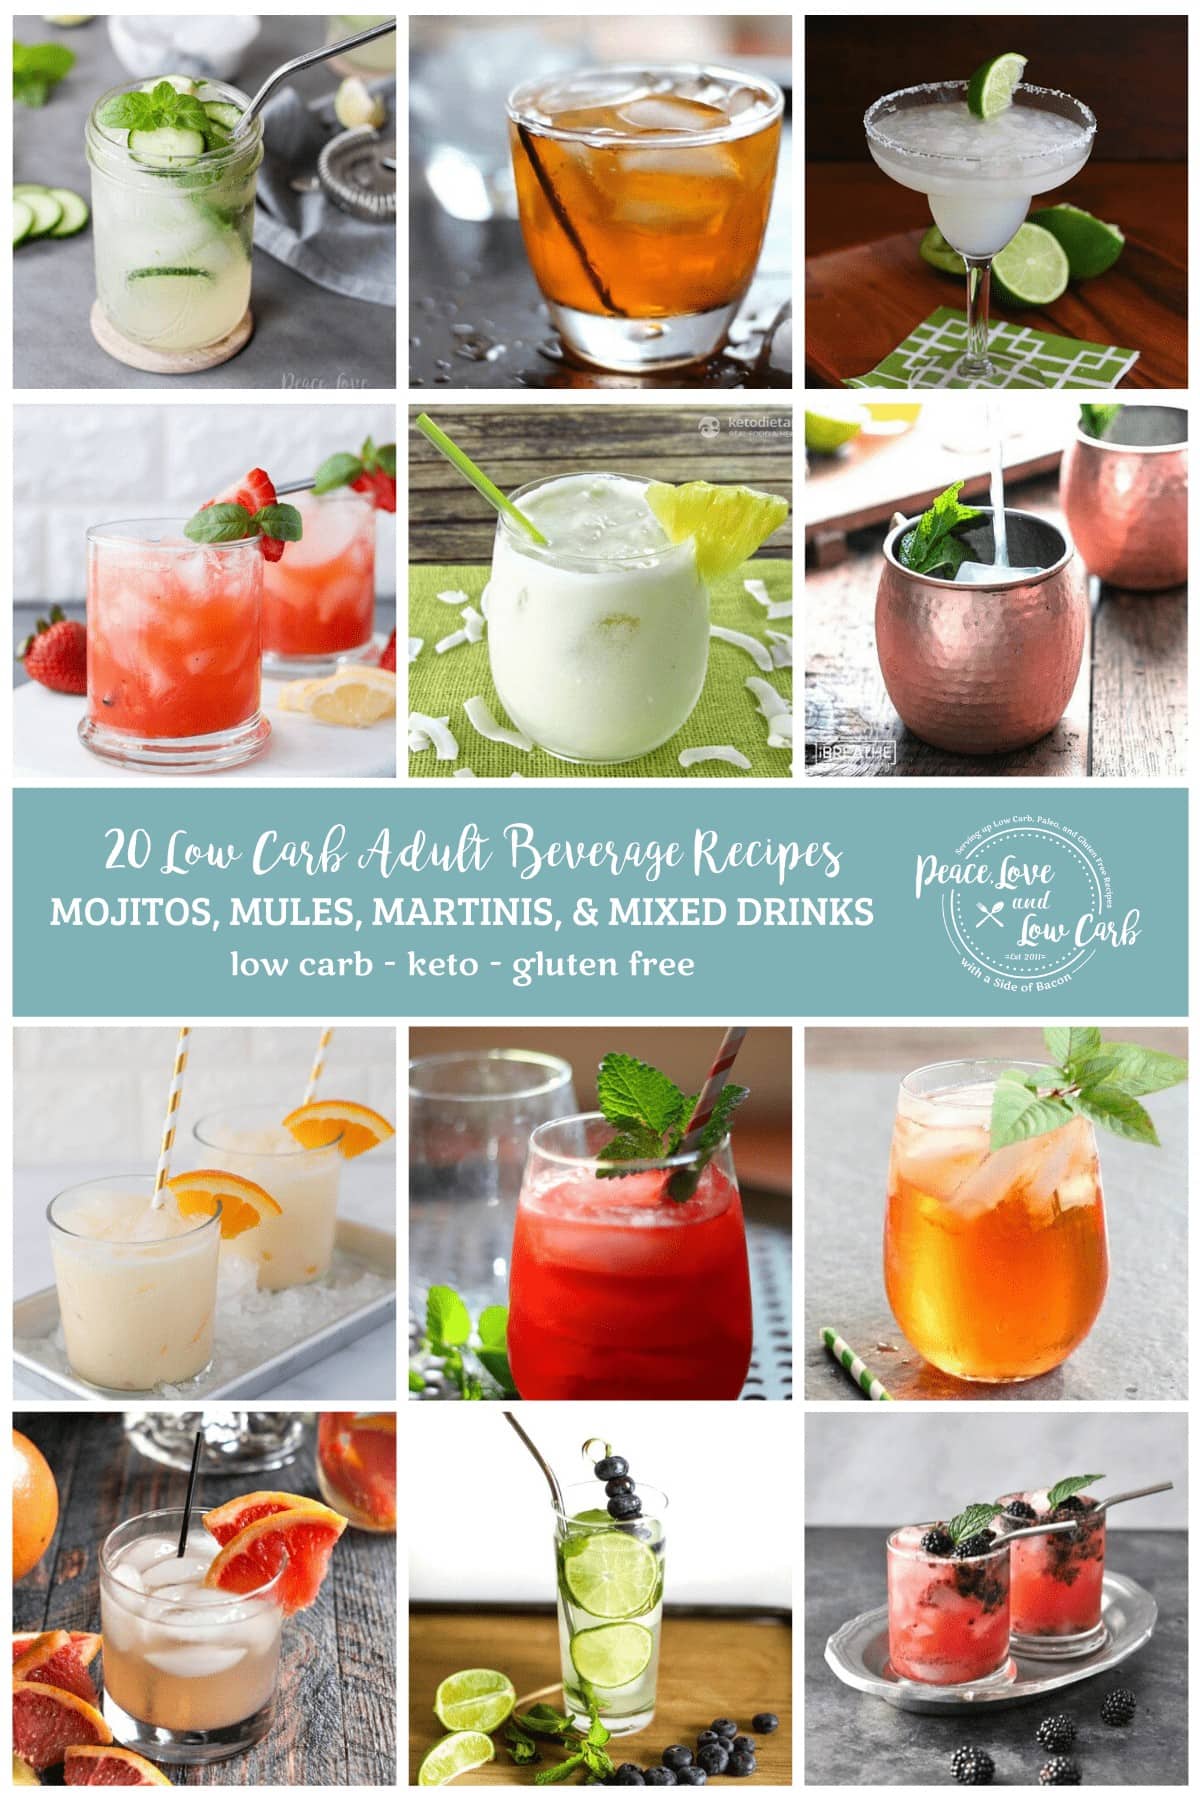 Collage image with 12 different photos of low carb adult beverages, each in a square, with a light teal banner across the middle of the image. Script text across the banner reads "20 Low Carb Adult Beverage Recipes" on one line, with a second line of bold caps text reading "MOJITOS, MARTINIS, & MIXED DRINKS" and a third line of text, all lower case "low carb - keto - gluten free." On the right side of the banner is the Peace Love and Low Carb Logo